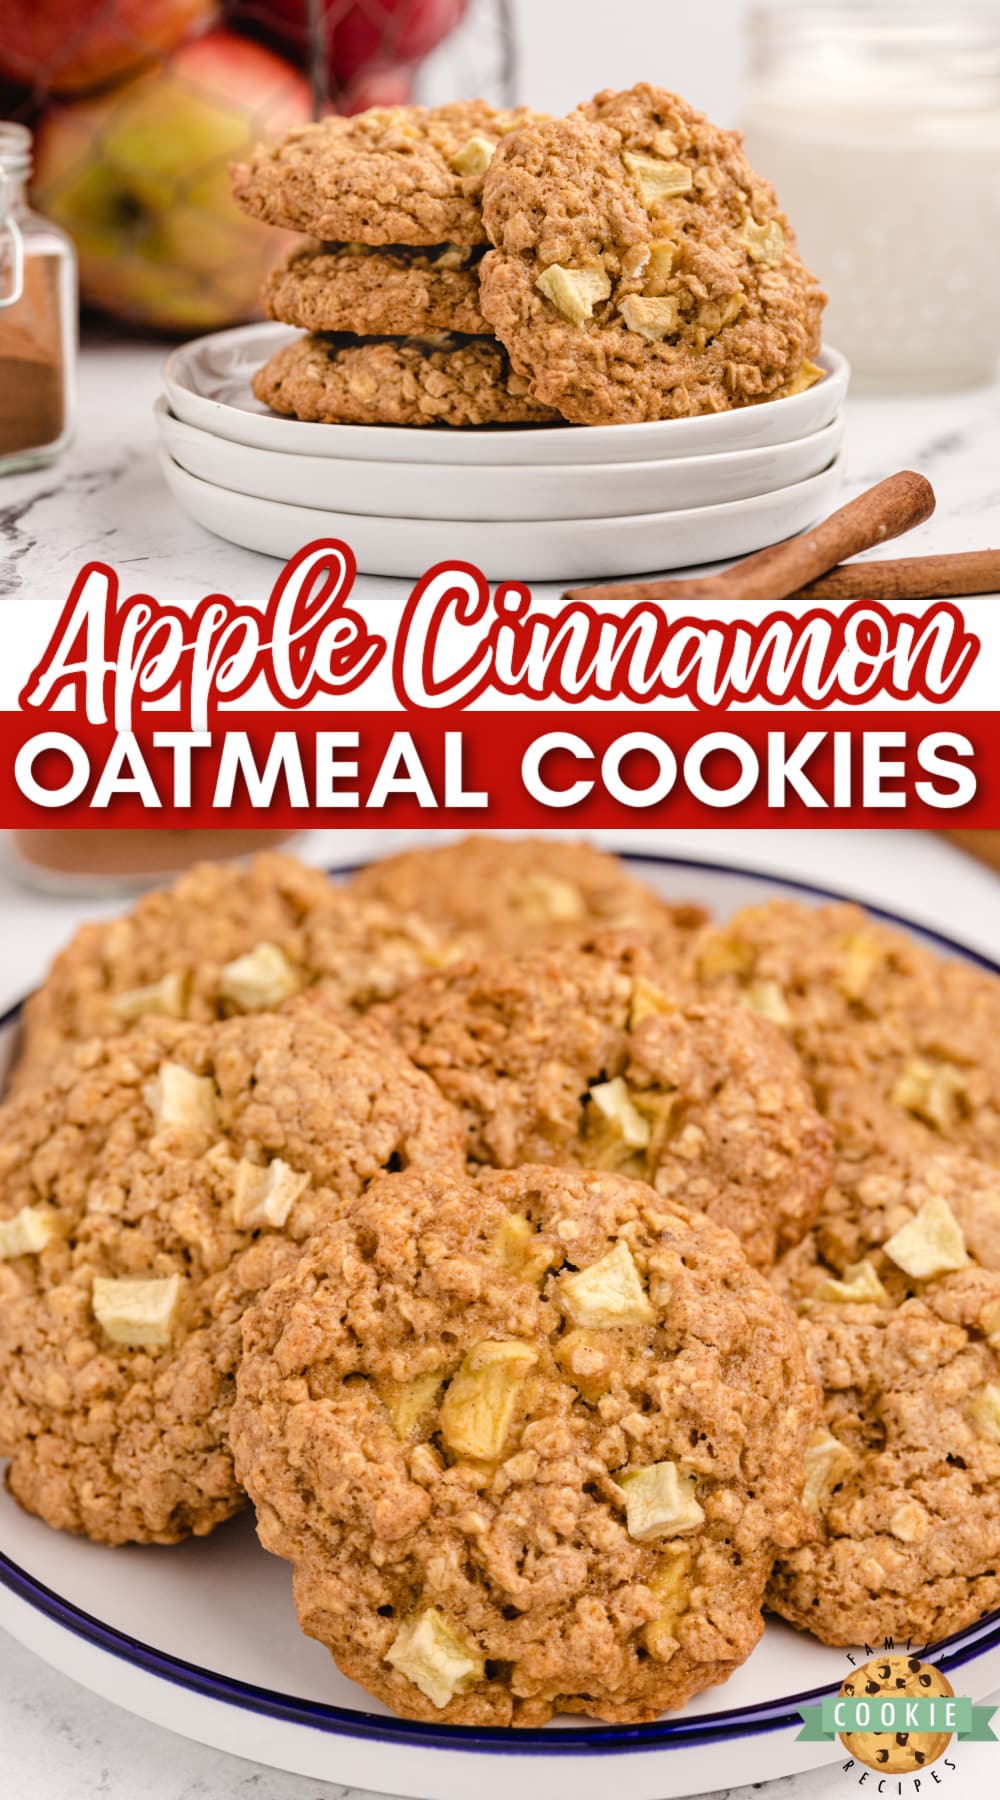 Apple Cinnamon Oatmeal Cookies made with a cake mix, fresh apples, applesauce and a few other basic ingredients. Delicious cake mix cookie recipe that tastes like apple pie!